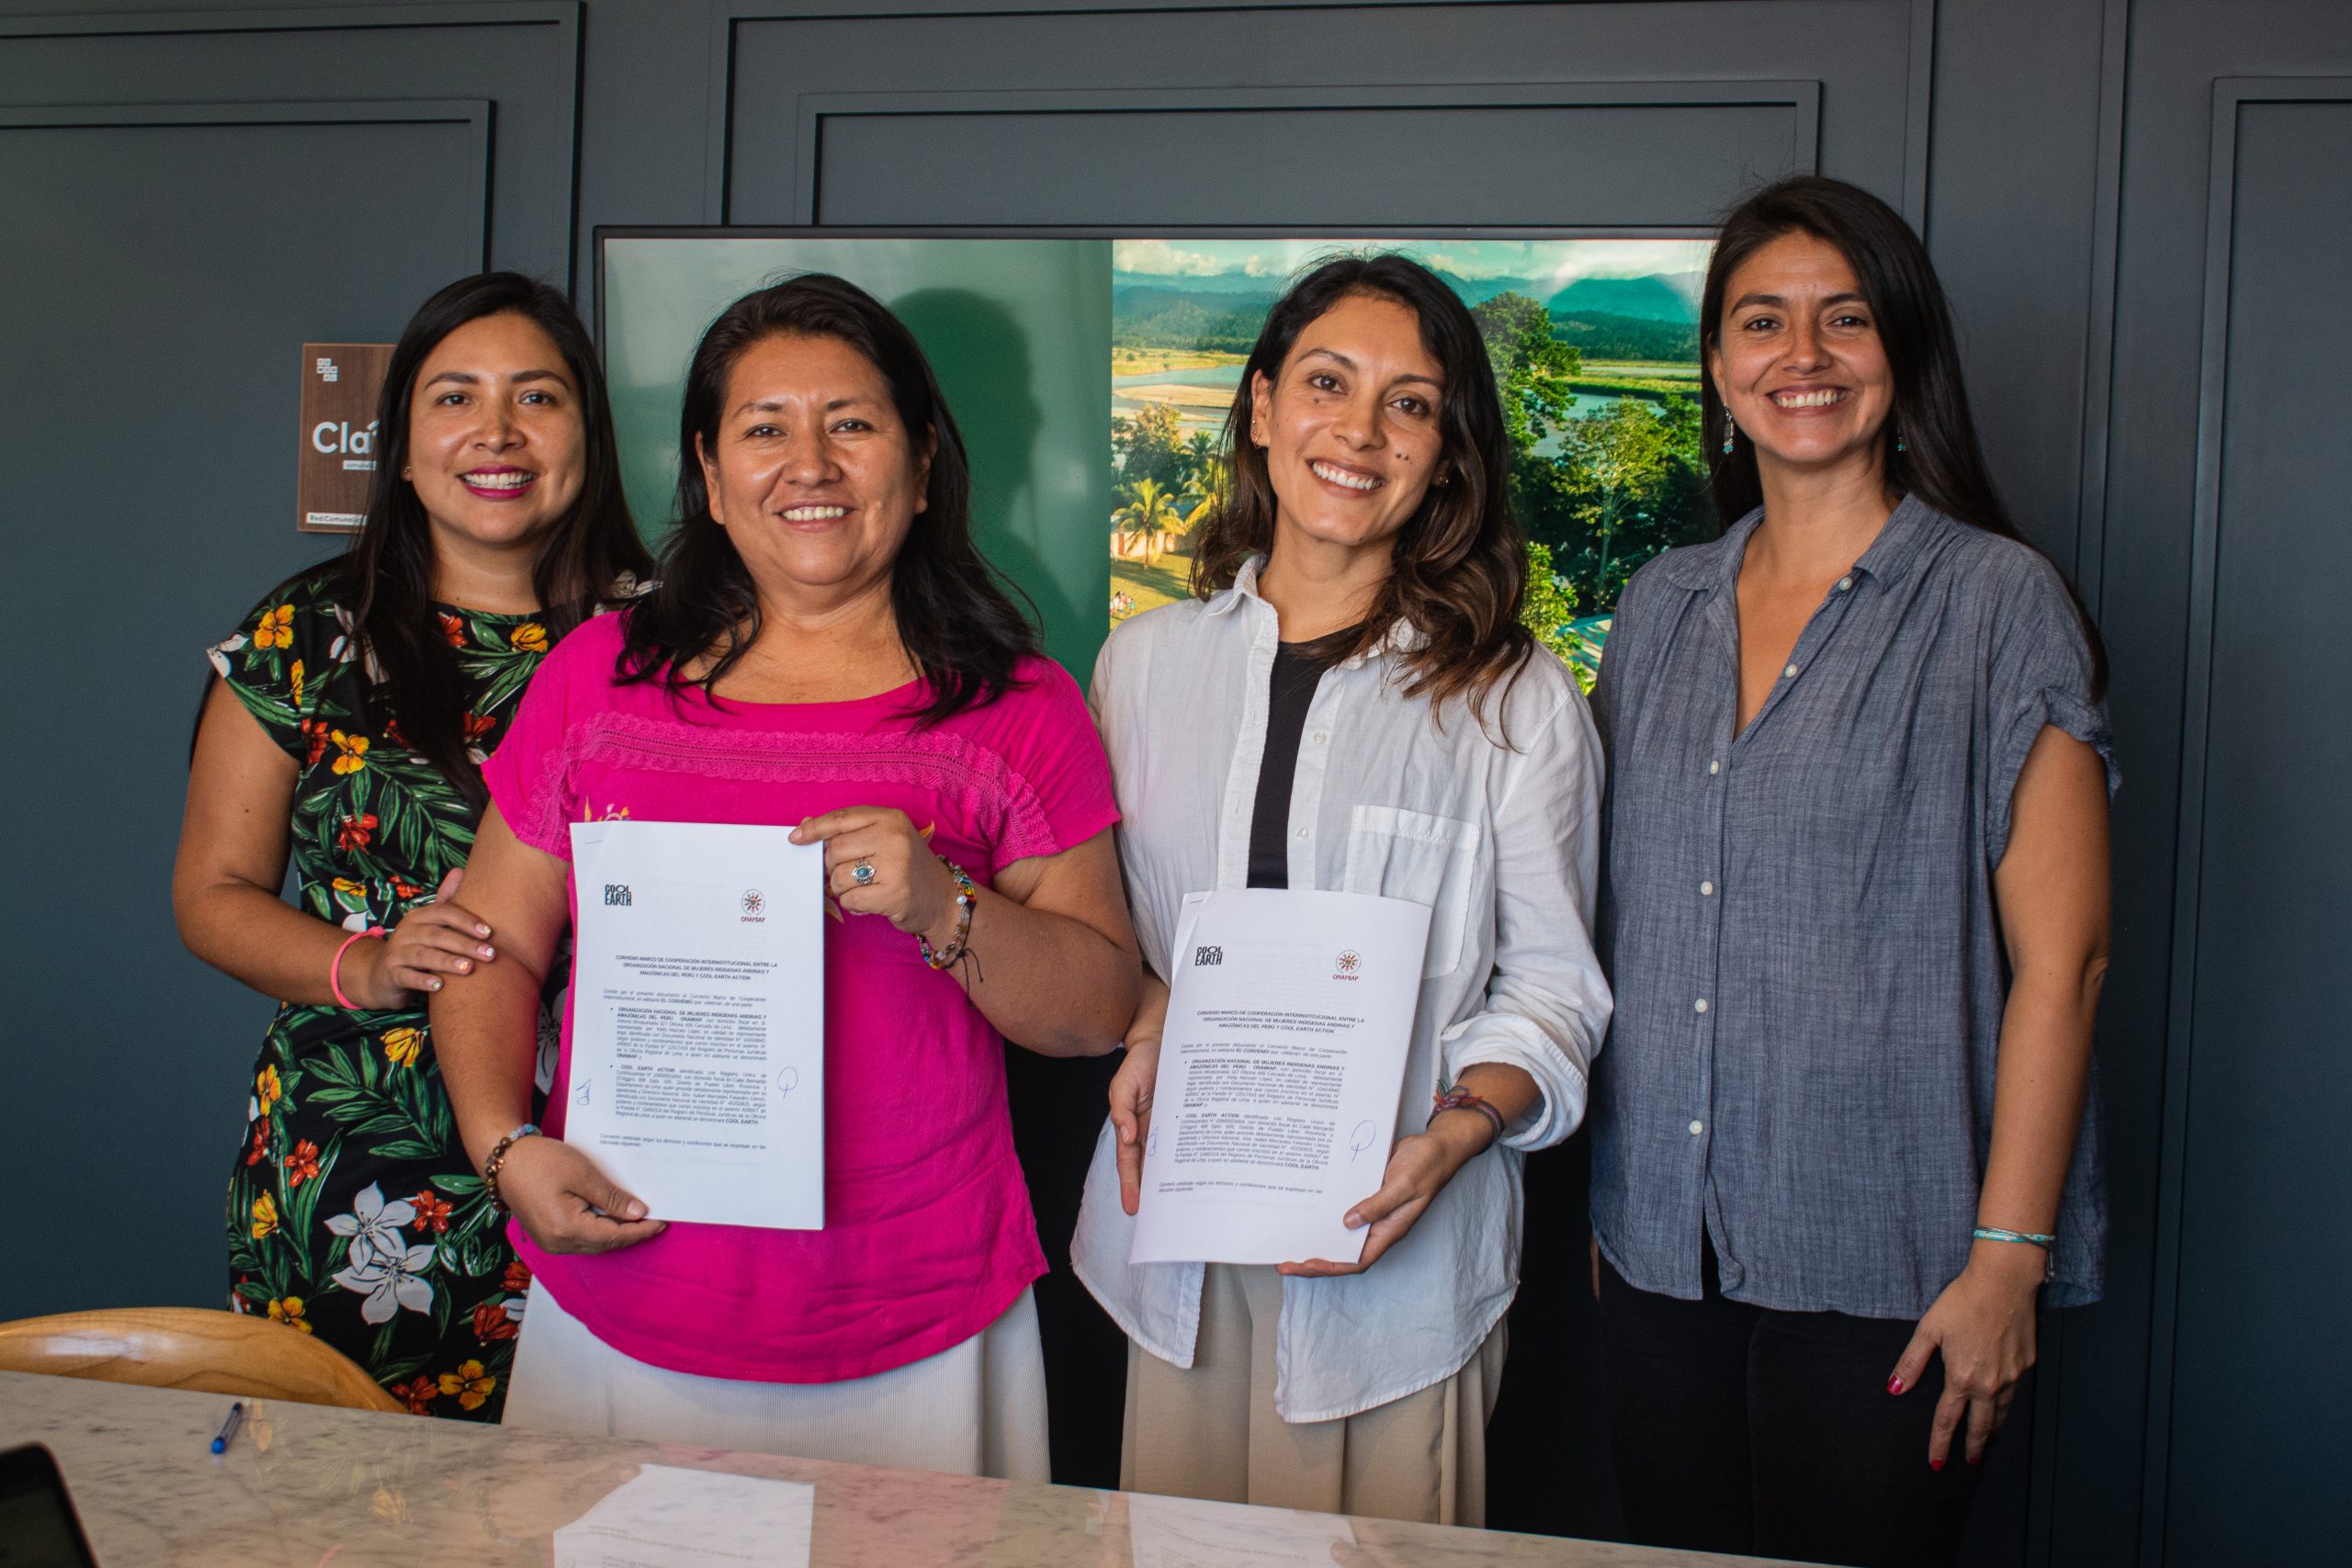 Ketty Marcelo (President of ONAMIAP), Isabel Felandro (country director of Cool Earth in Peru and Head of Programmes), Patricia Quiñones (Cash Transfers Manager, Peru) sign agreement between ONAMIAP and Cool Earth